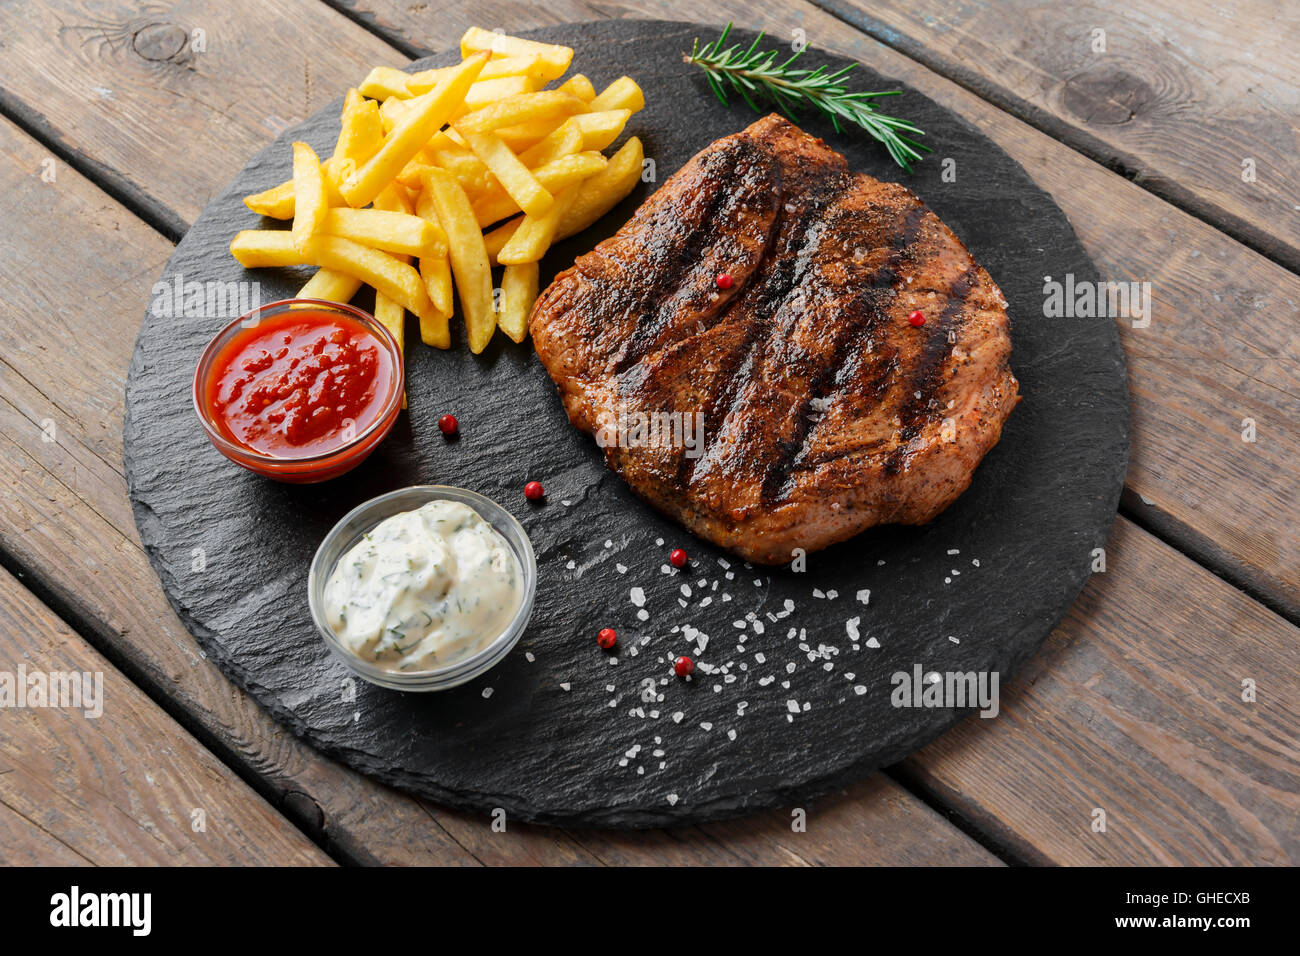 Beef steak with french fries and sauce Stock Photo